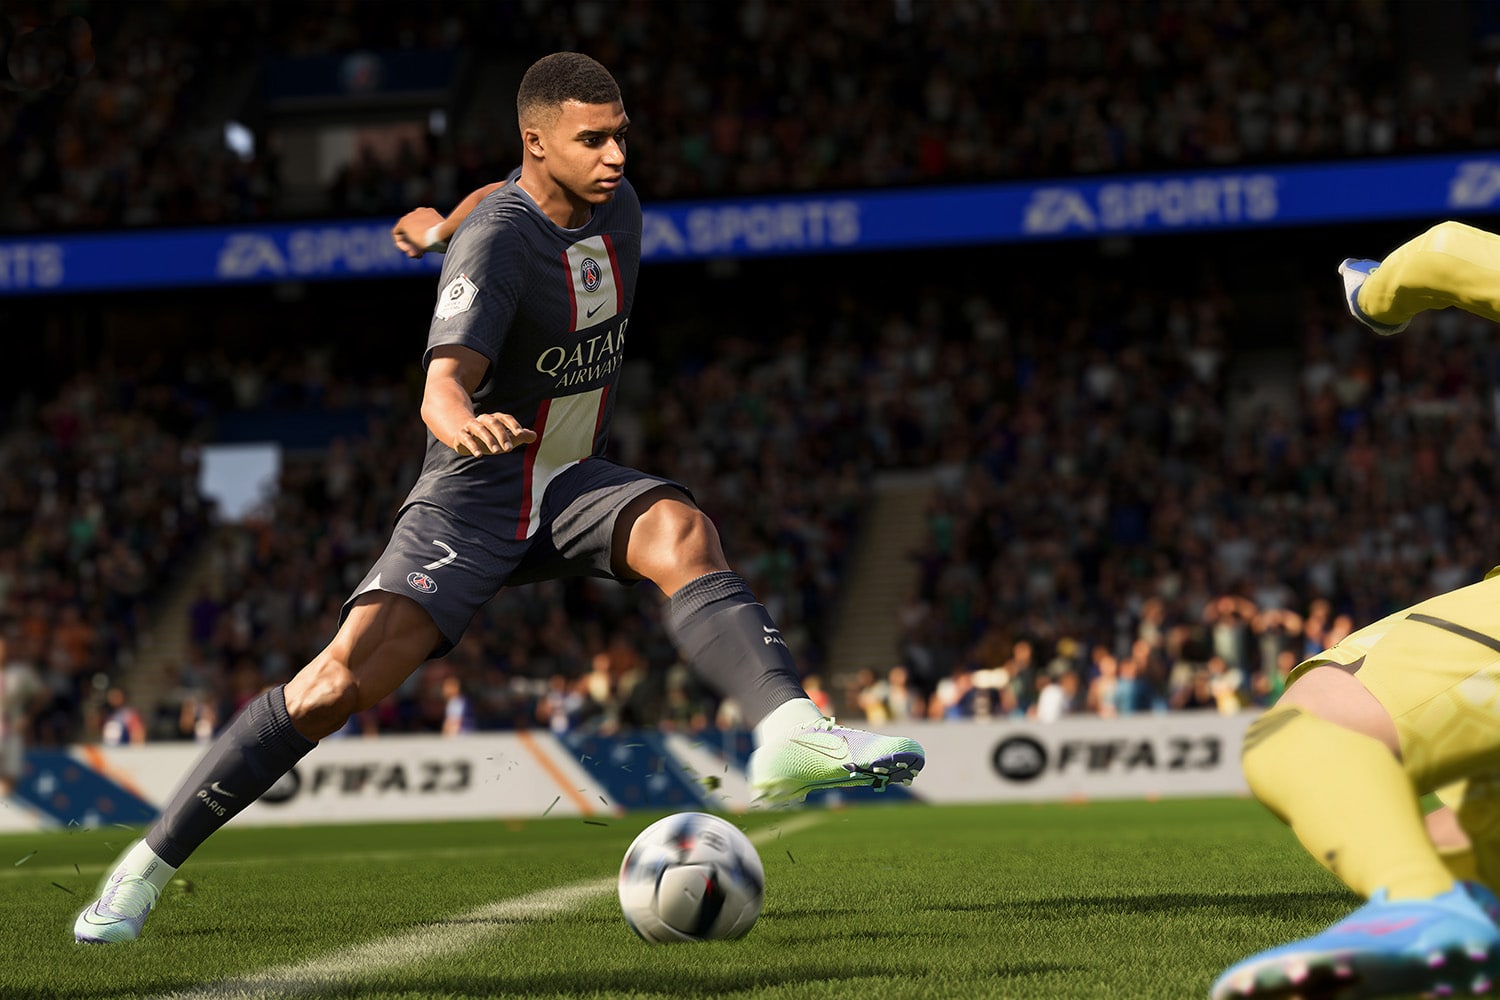 Will FIFA 23 be the last FIFA game?